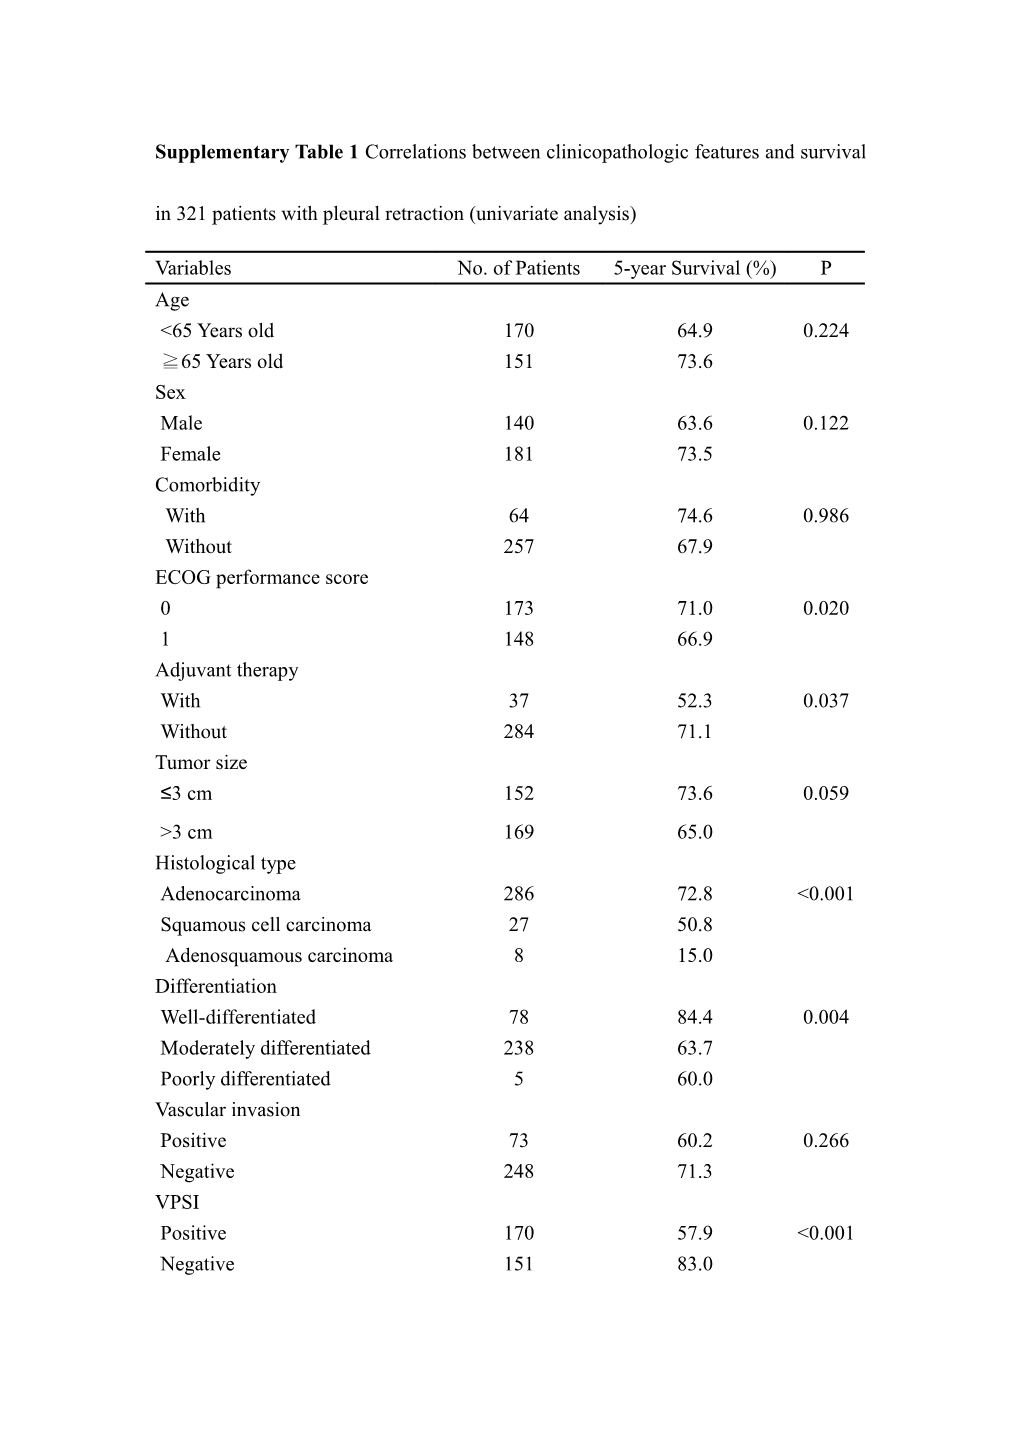 Supplementary Table 1 Correlations Between Clinicopathologic Features and Survival in 321